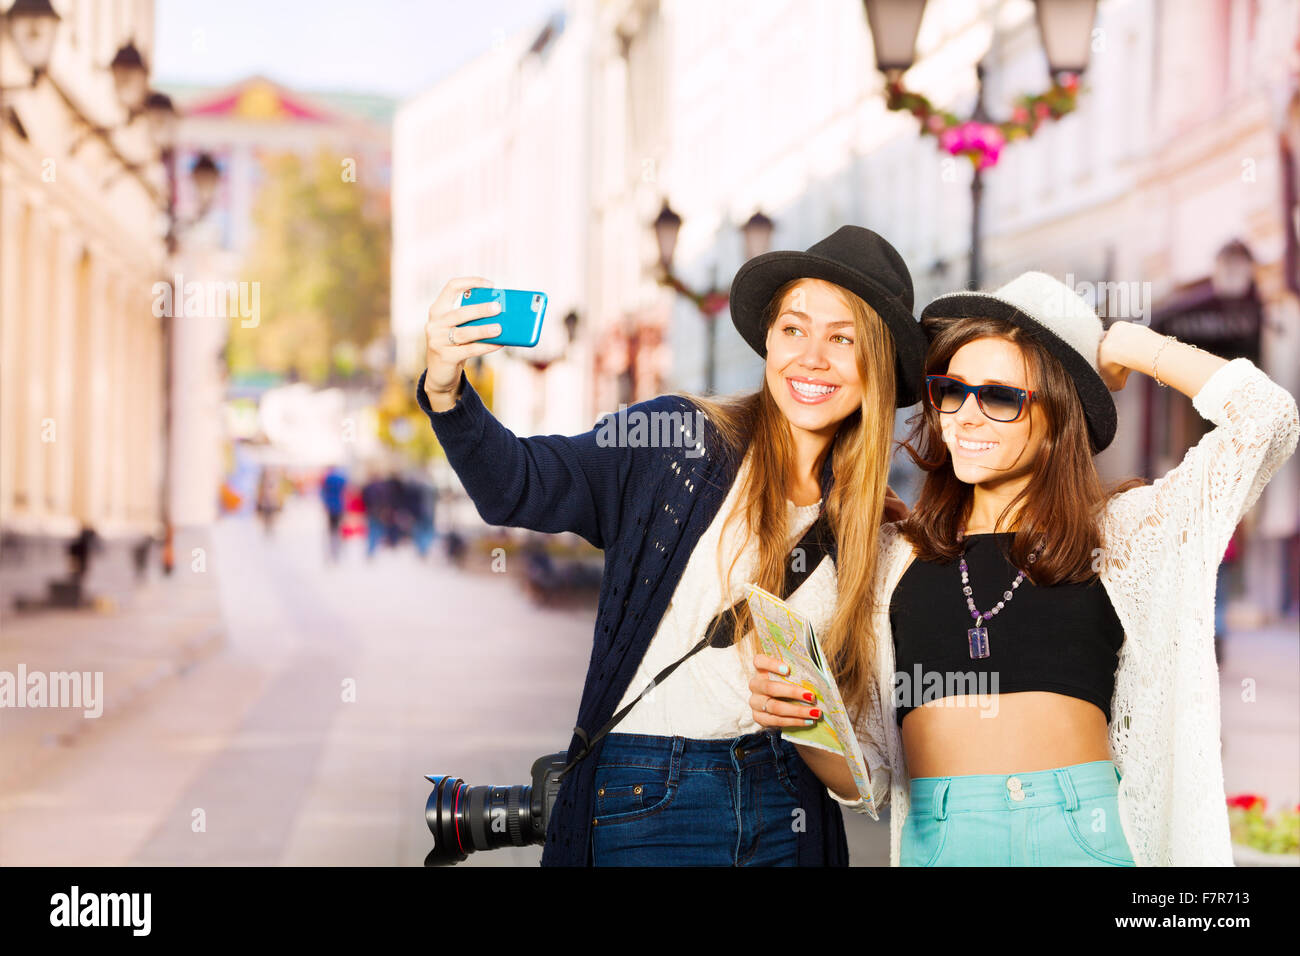 Two happy girls taking selfies with mobile phone Stock Photo